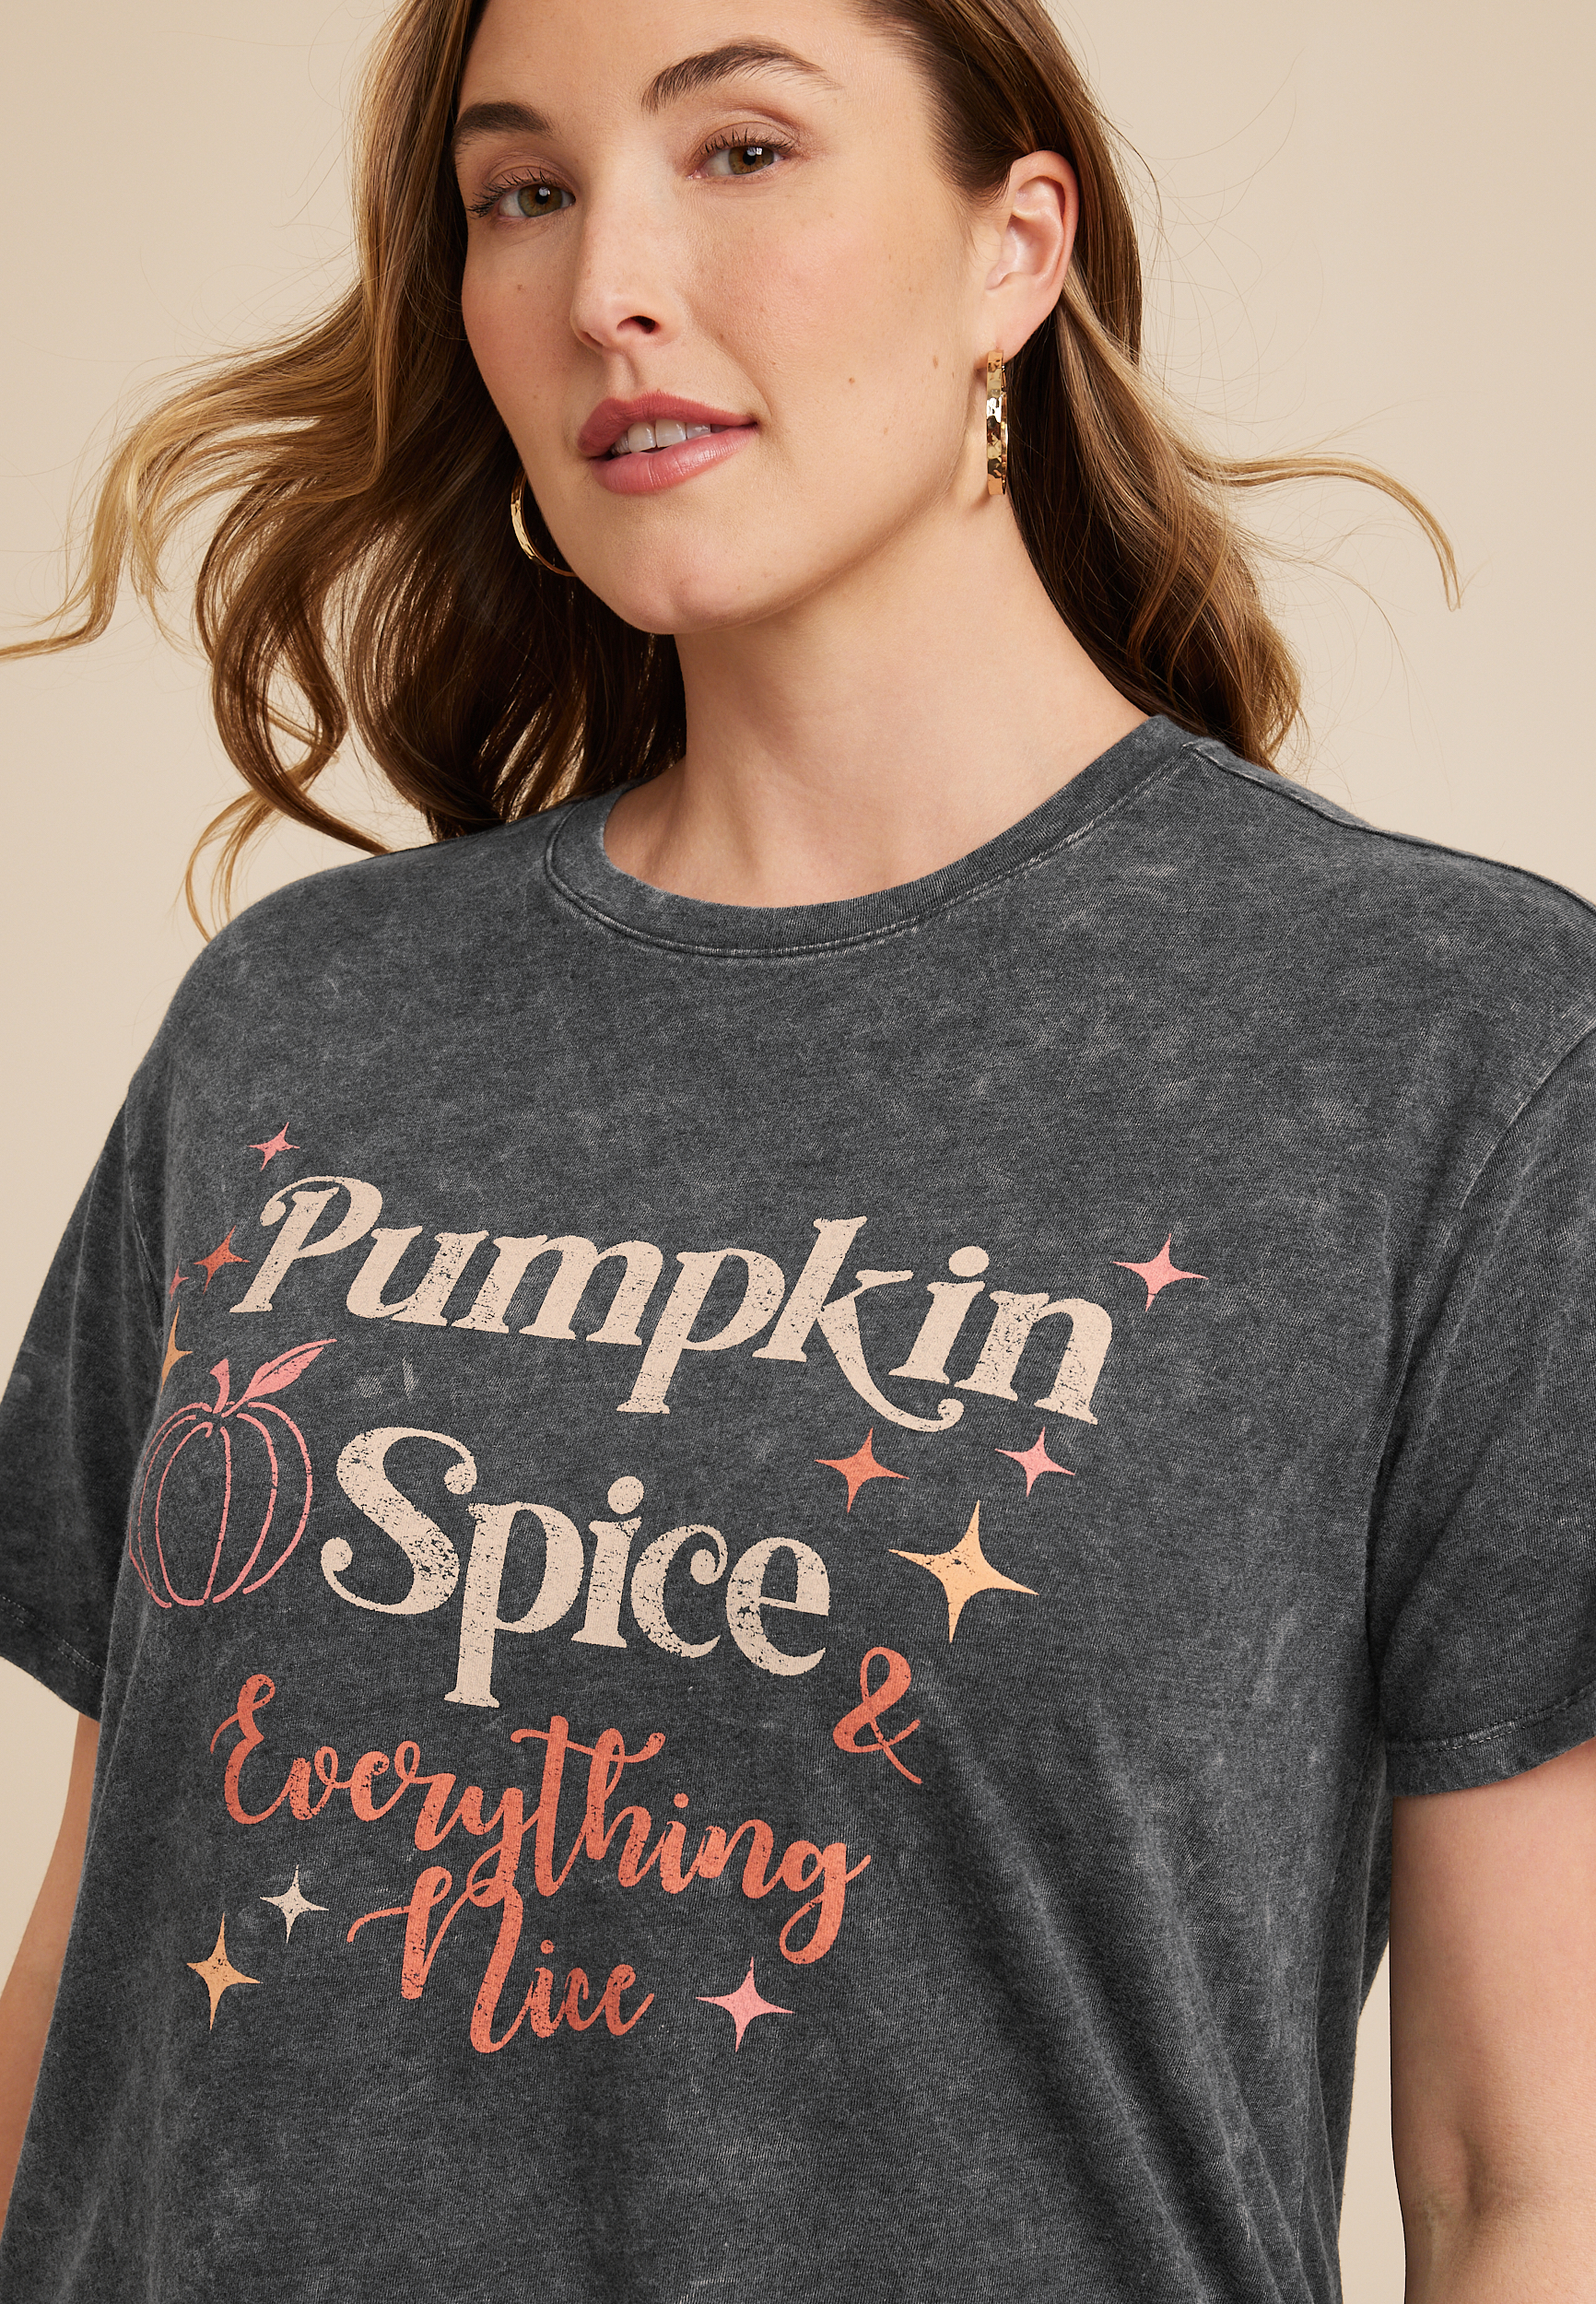 Deals Under 5 Dollars Halloween Shirts for Women 3/4 Sleeve Tops Pumpkin  Witch Costume Funny Graphic Tshirts Plus Size Fall Fashion 2023 Blouses